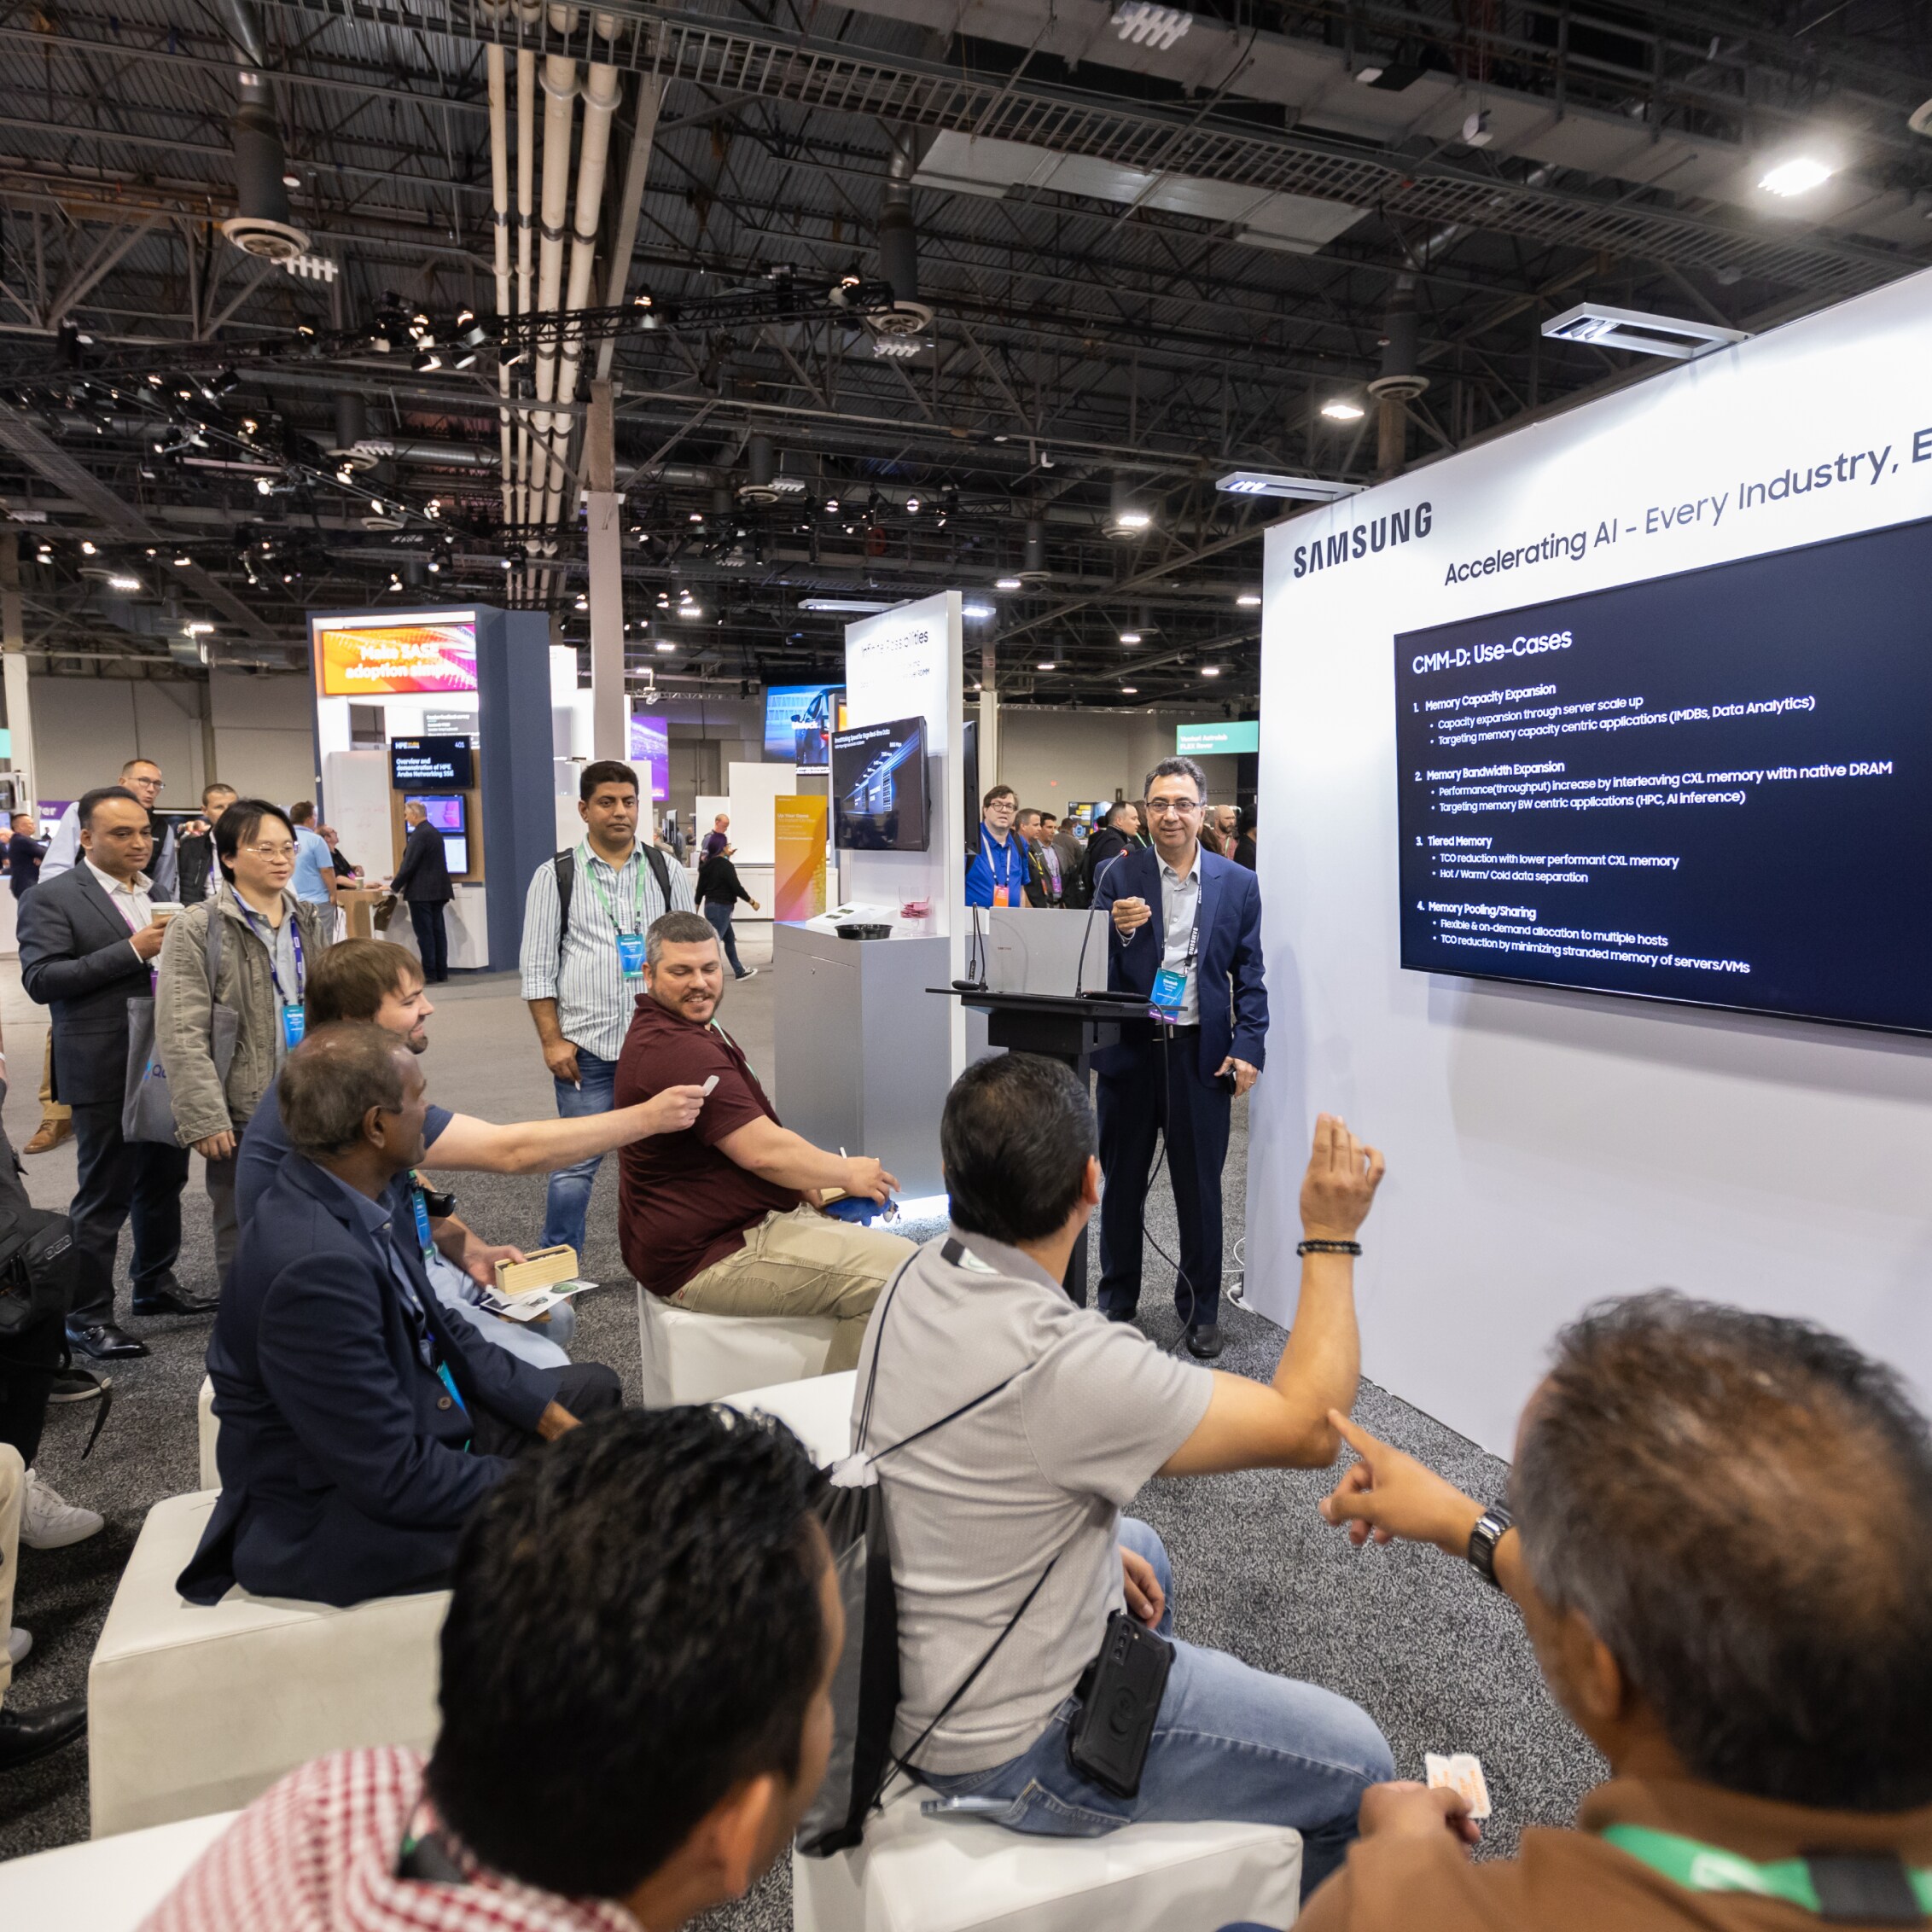 An interactive session at the Samsung booth with attendees asking questions about CMM-D use-cases in accelerating AI.